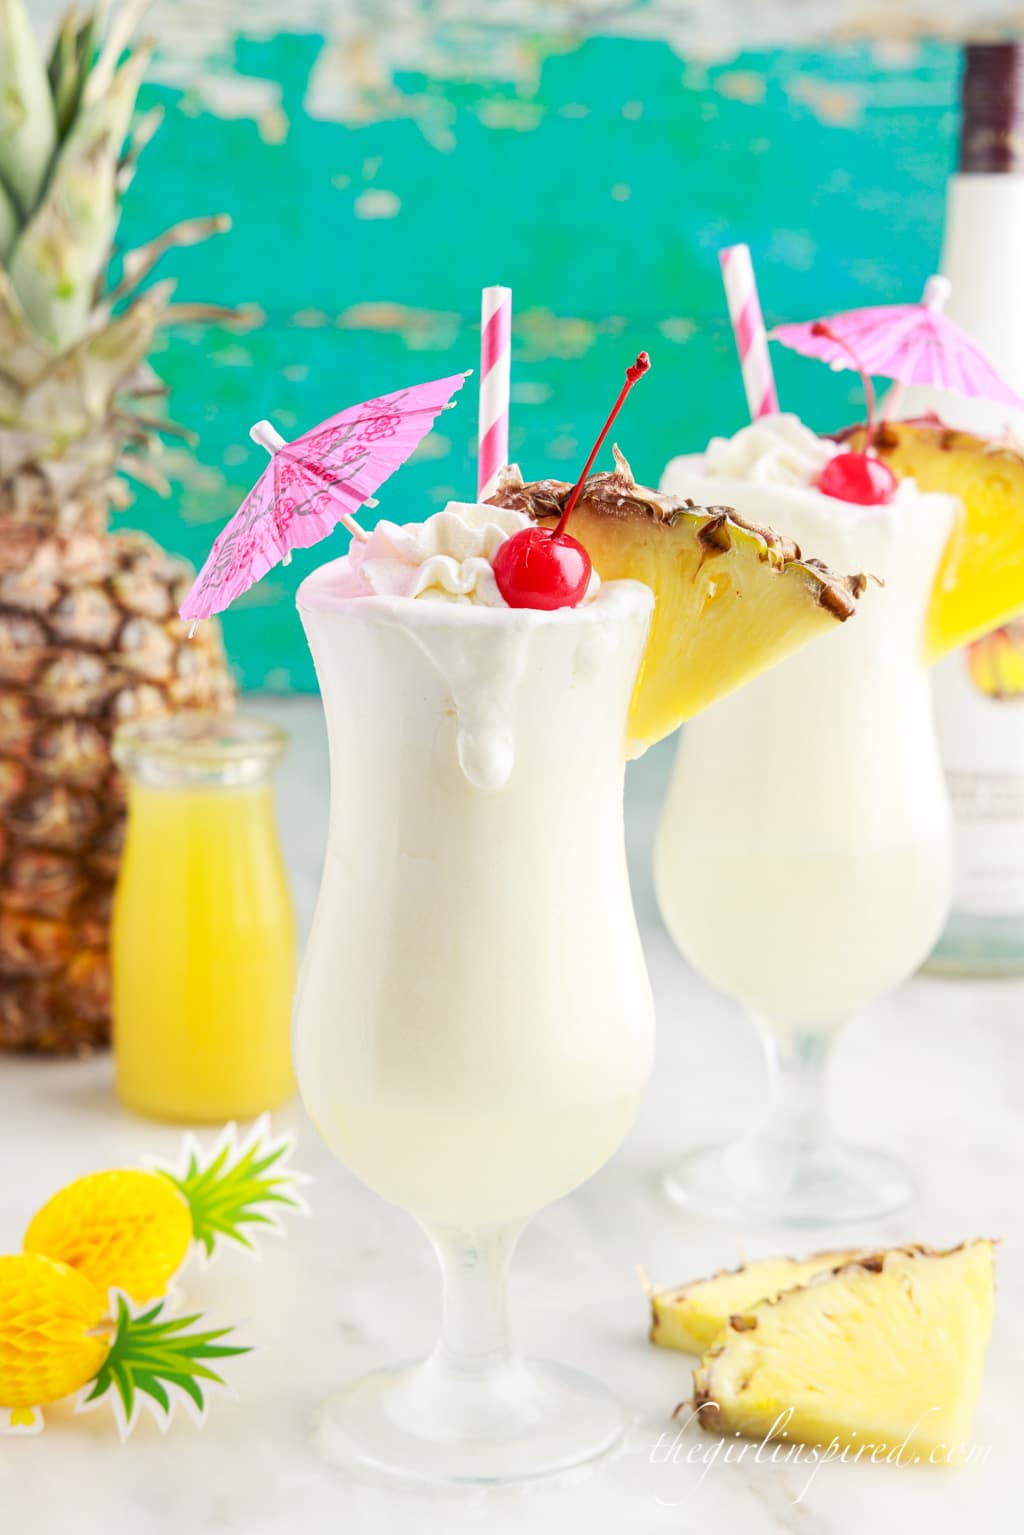 two pina coladas next to a whole pineapple and a glass bottle of pineapple juice